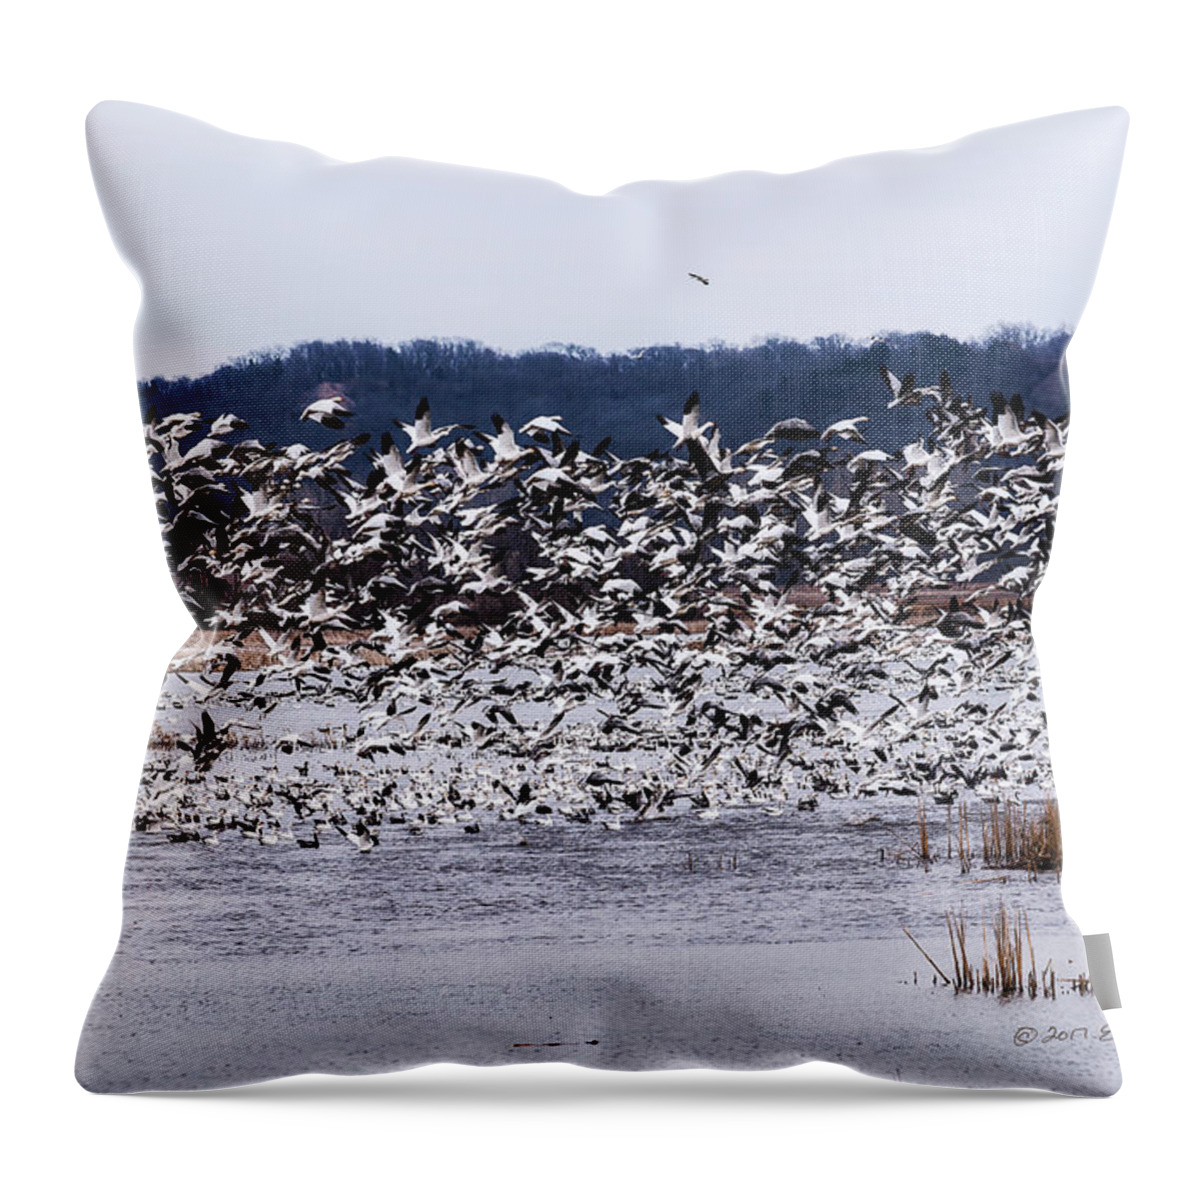 Squaw Creek Throw Pillow featuring the photograph Snow Geese At Squaw Creek by Ed Peterson